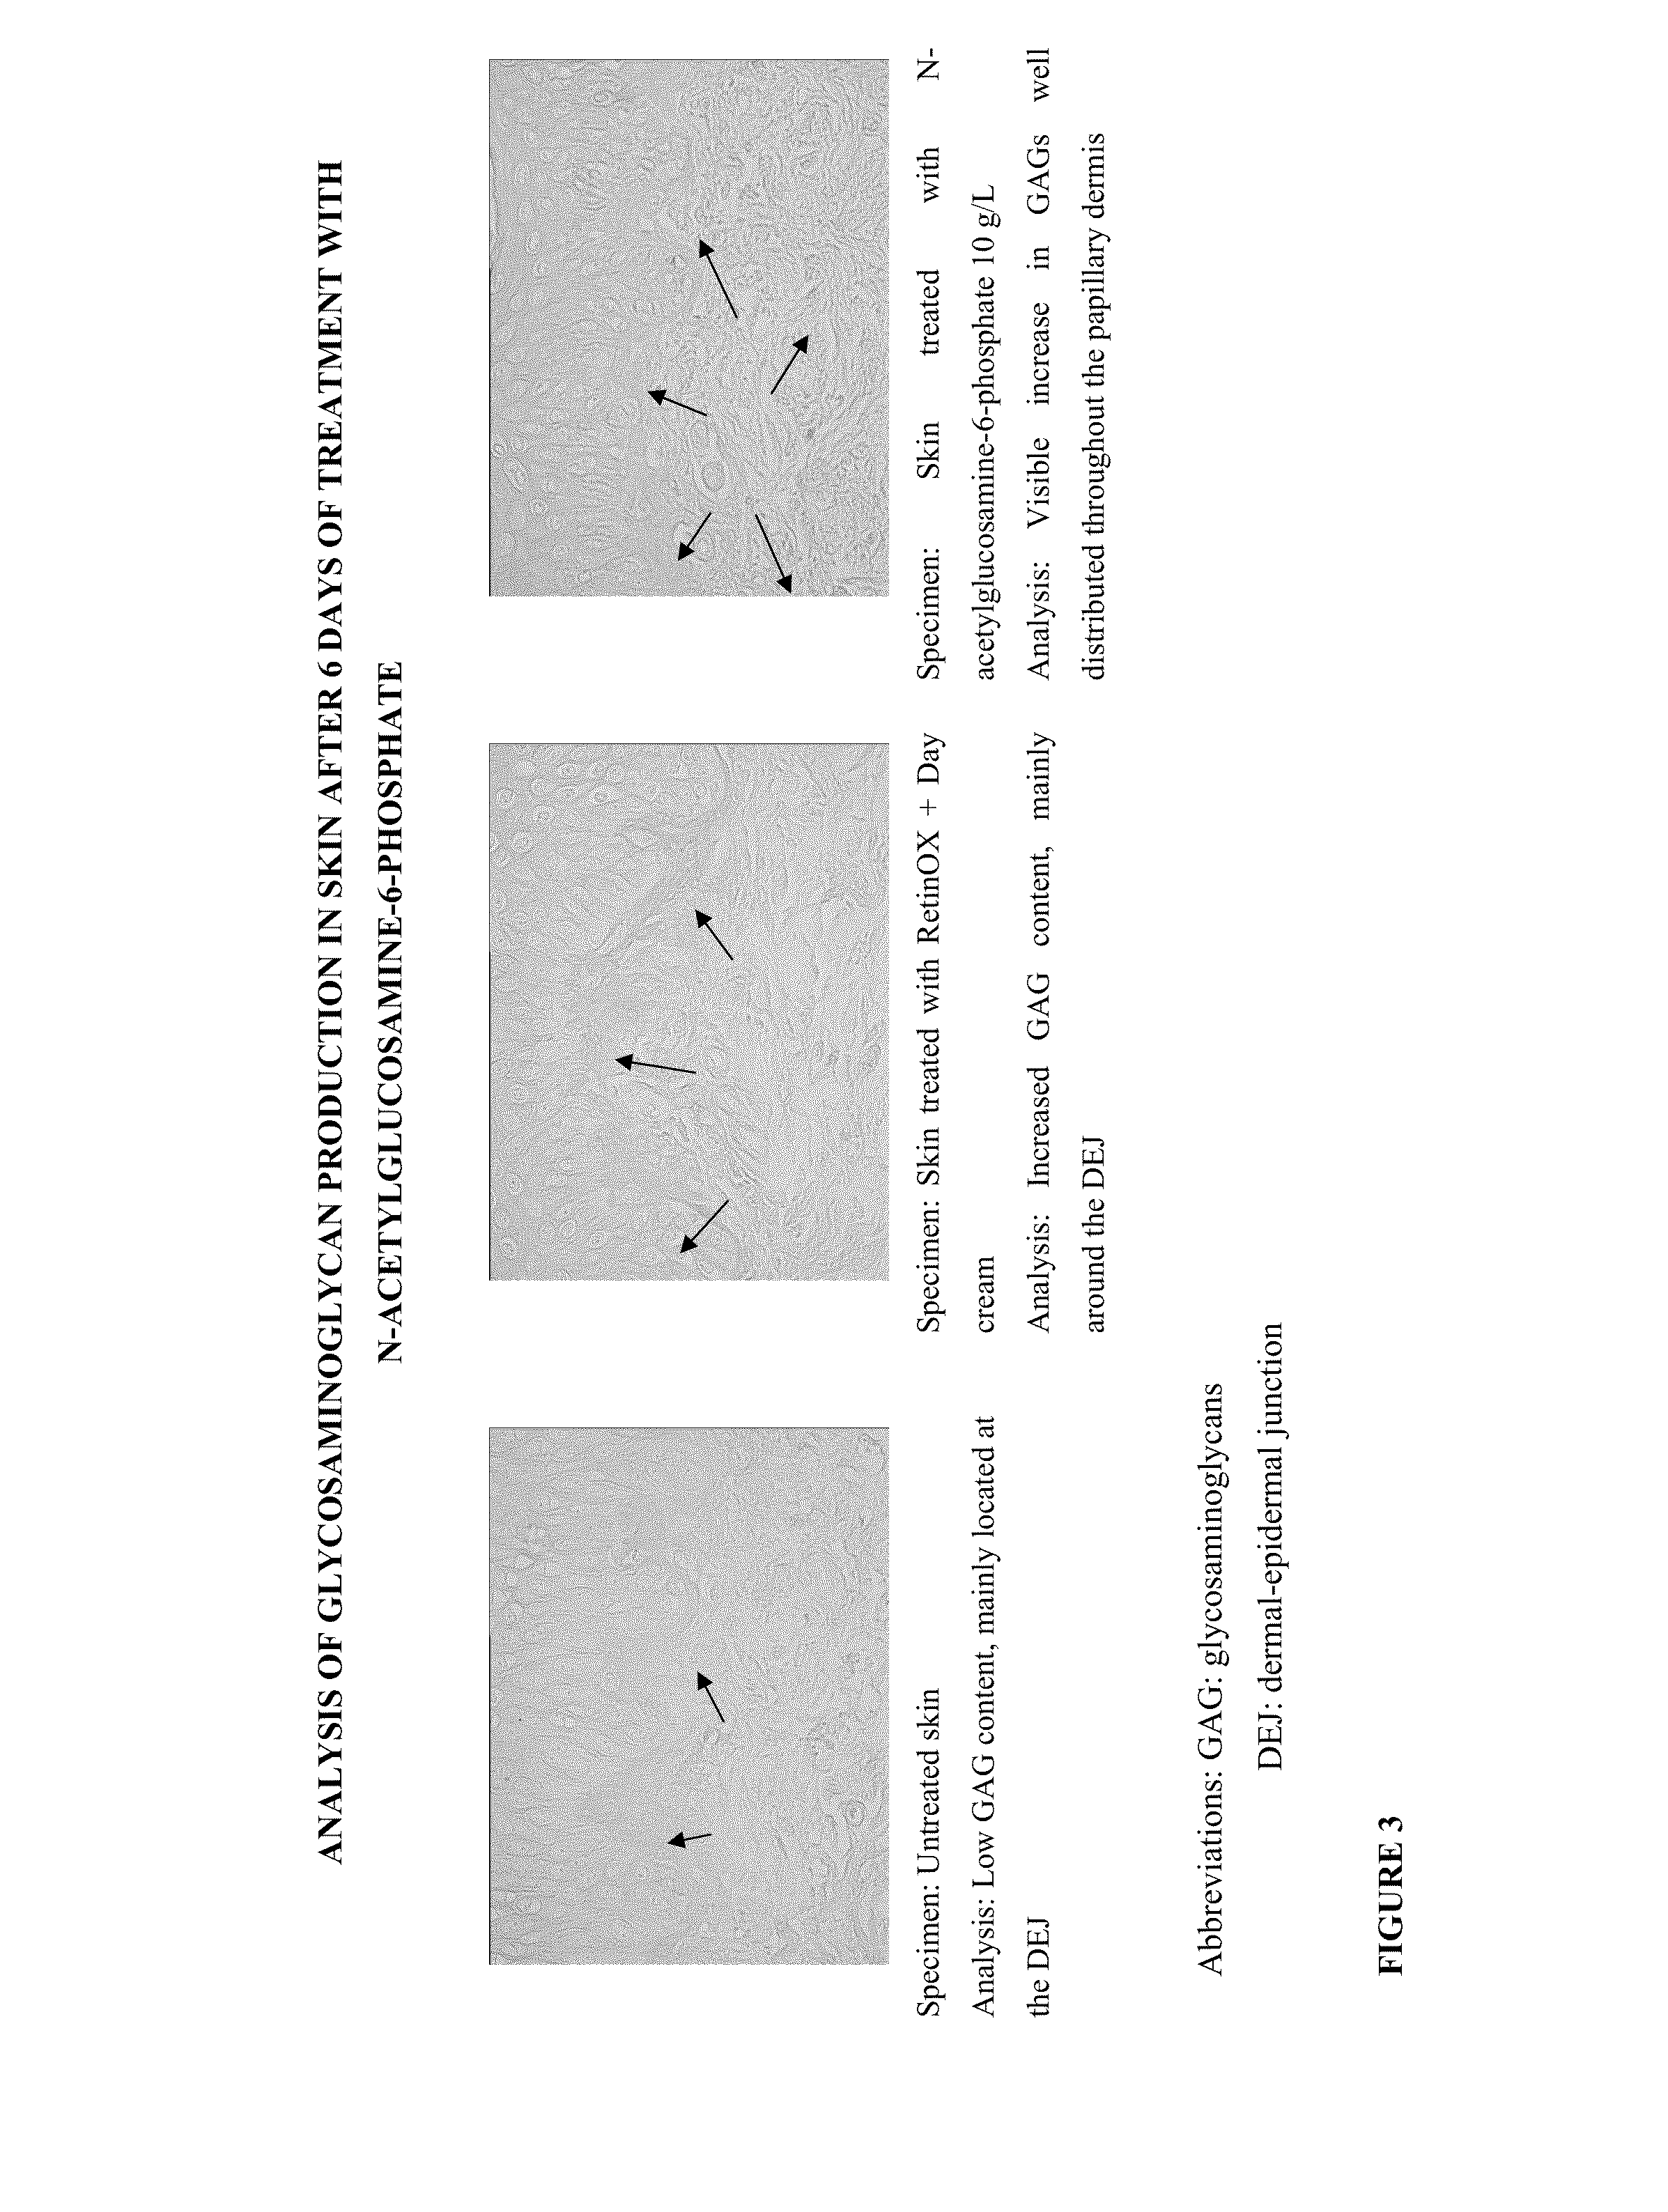 Cosmetic and Pharmaceutical Composition Comprising N-Acetylglucosamine-6-Phosphate